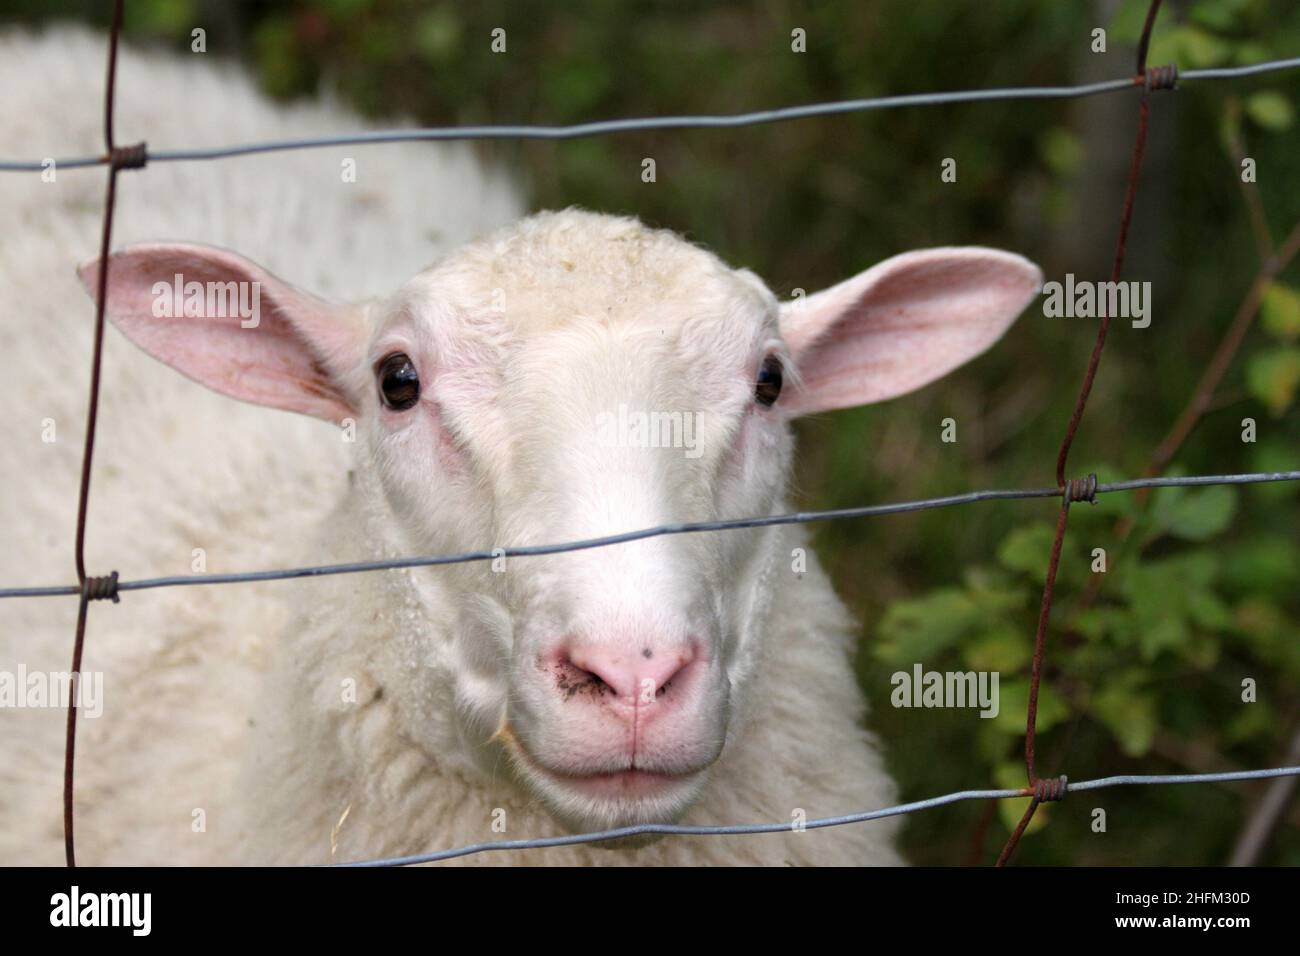 The detail of the face of the sheep behind the fence. Looking stupid with popped eyes. Stock Photo